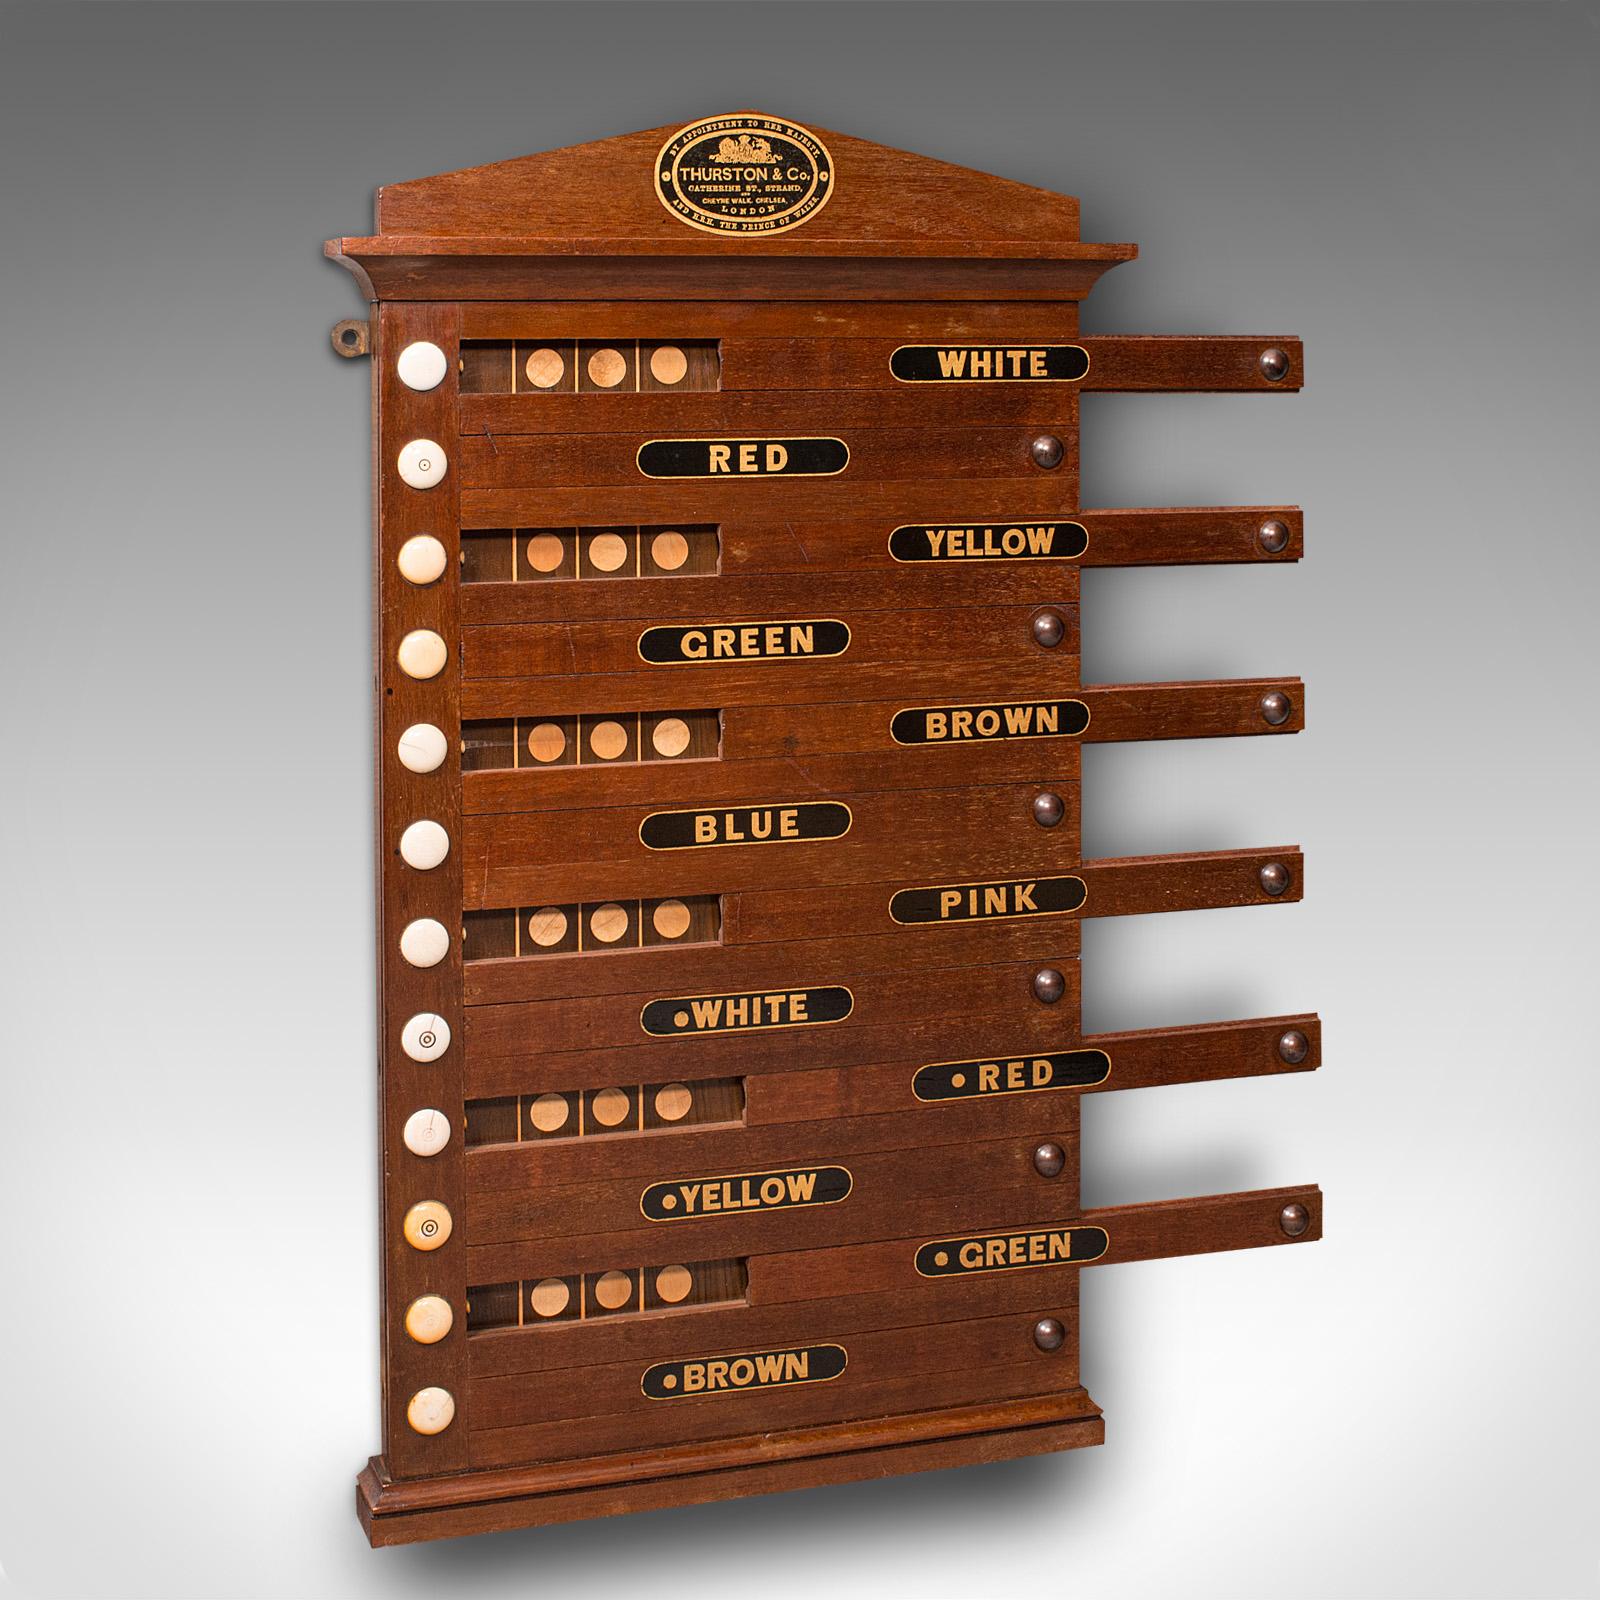 This is an antique life pool scoreboard. An English, mahogany 12 player board by Thurston & Co, dating to the late Victorian period, circa 1900.

Charming scoreboard for the 19th century pocket billiards game of Life Pool
Displaying a desirable